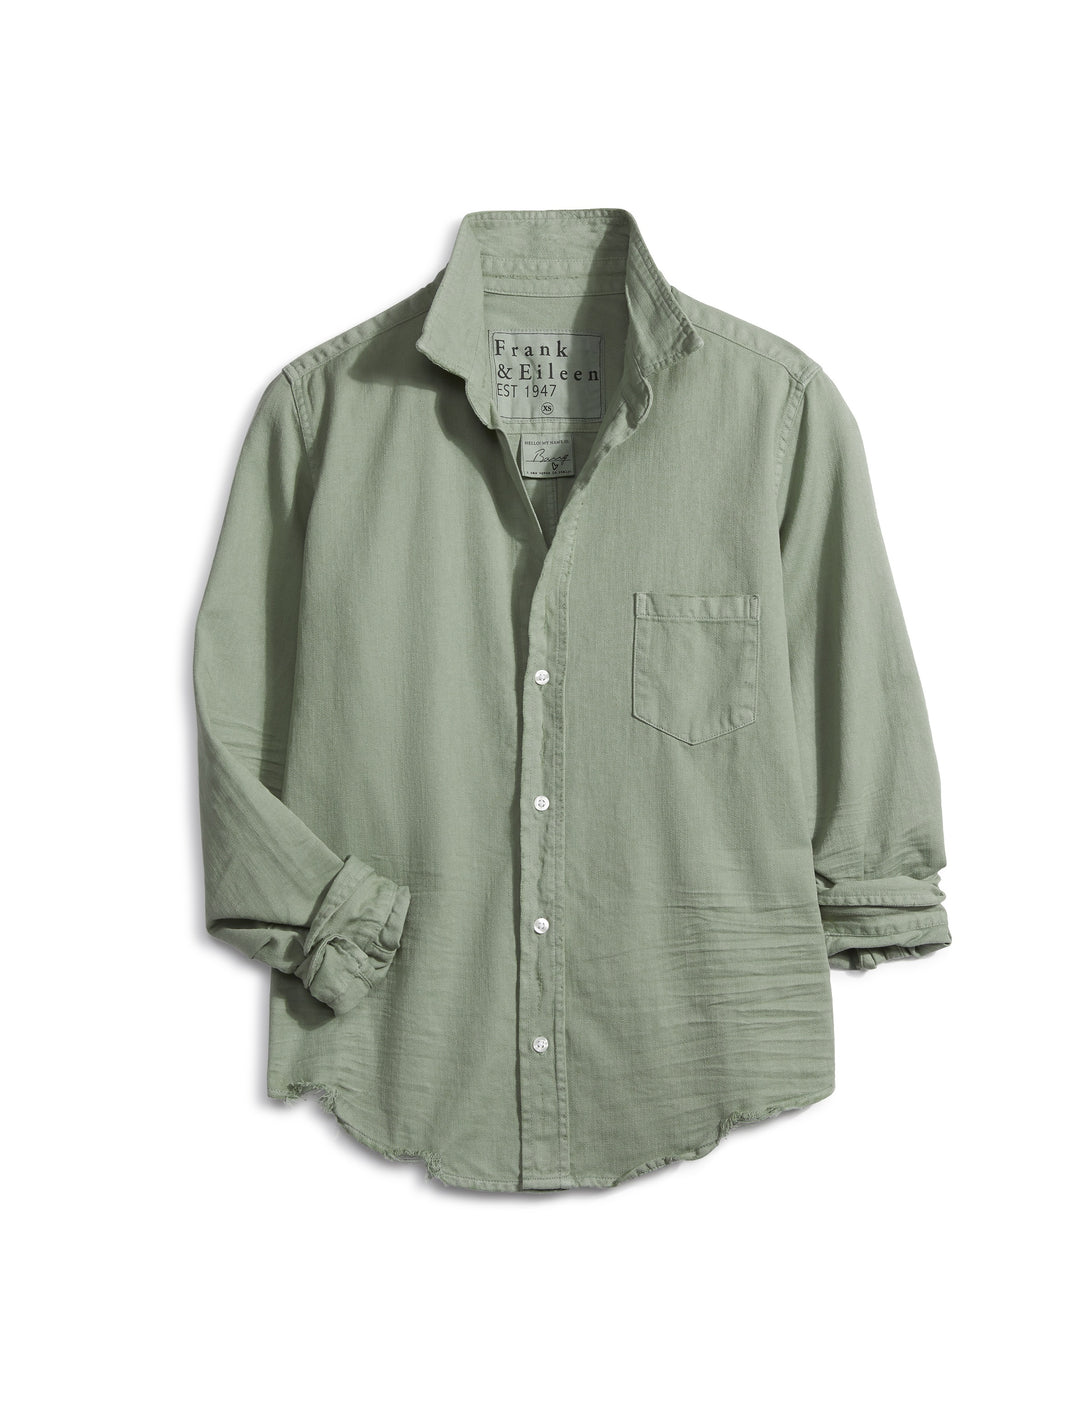 Frank & Eileen - Barry Woven Button Up in Washed Green